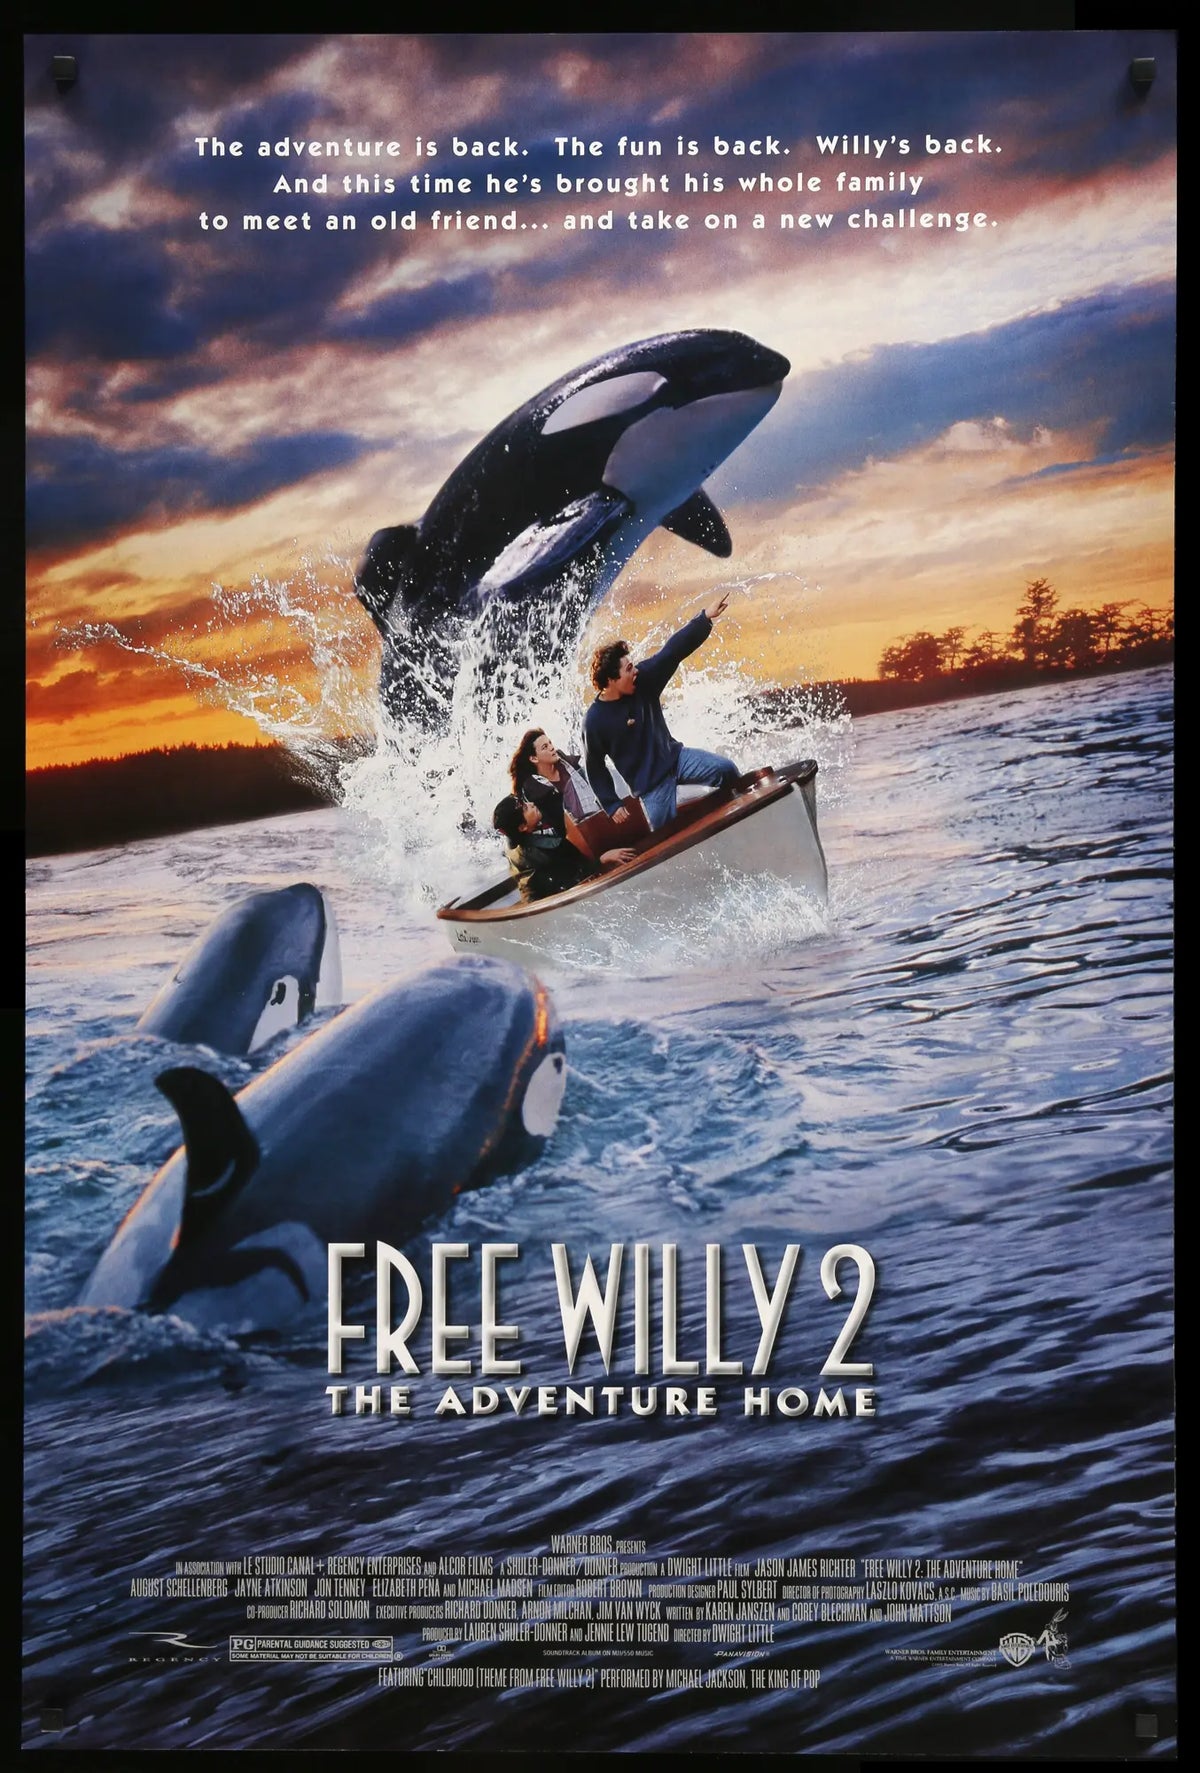 Free Willy 2: The Adventure Home (1995) original movie poster for sale at Original Film Art